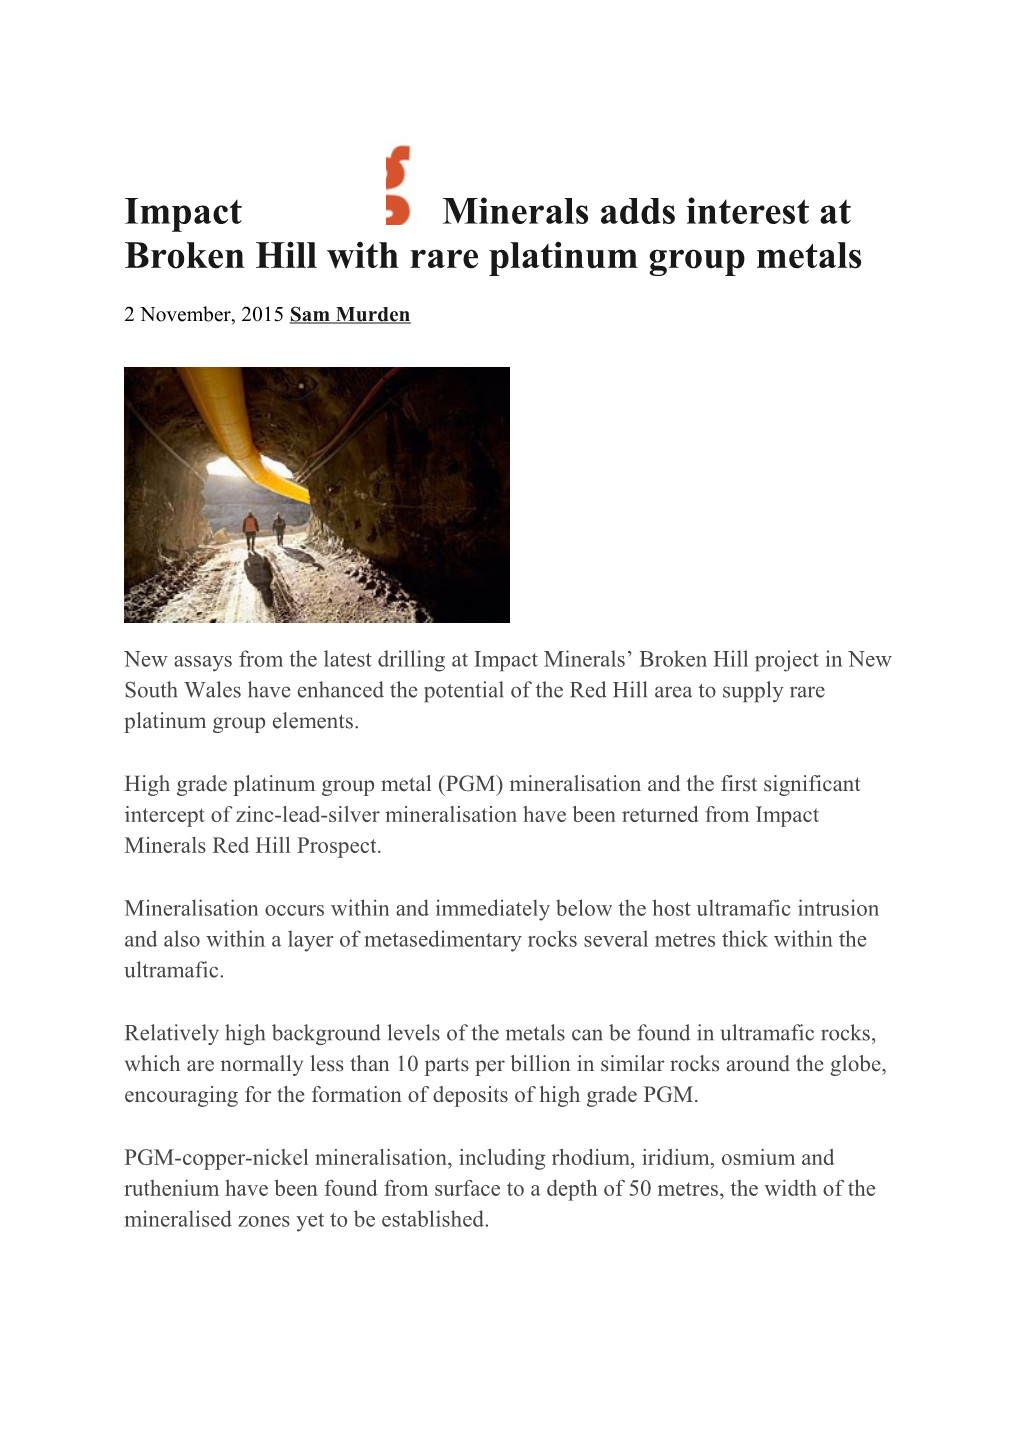 Impact Minerals Adds Interest at Broken Hill with Rare Platinum Group Metals